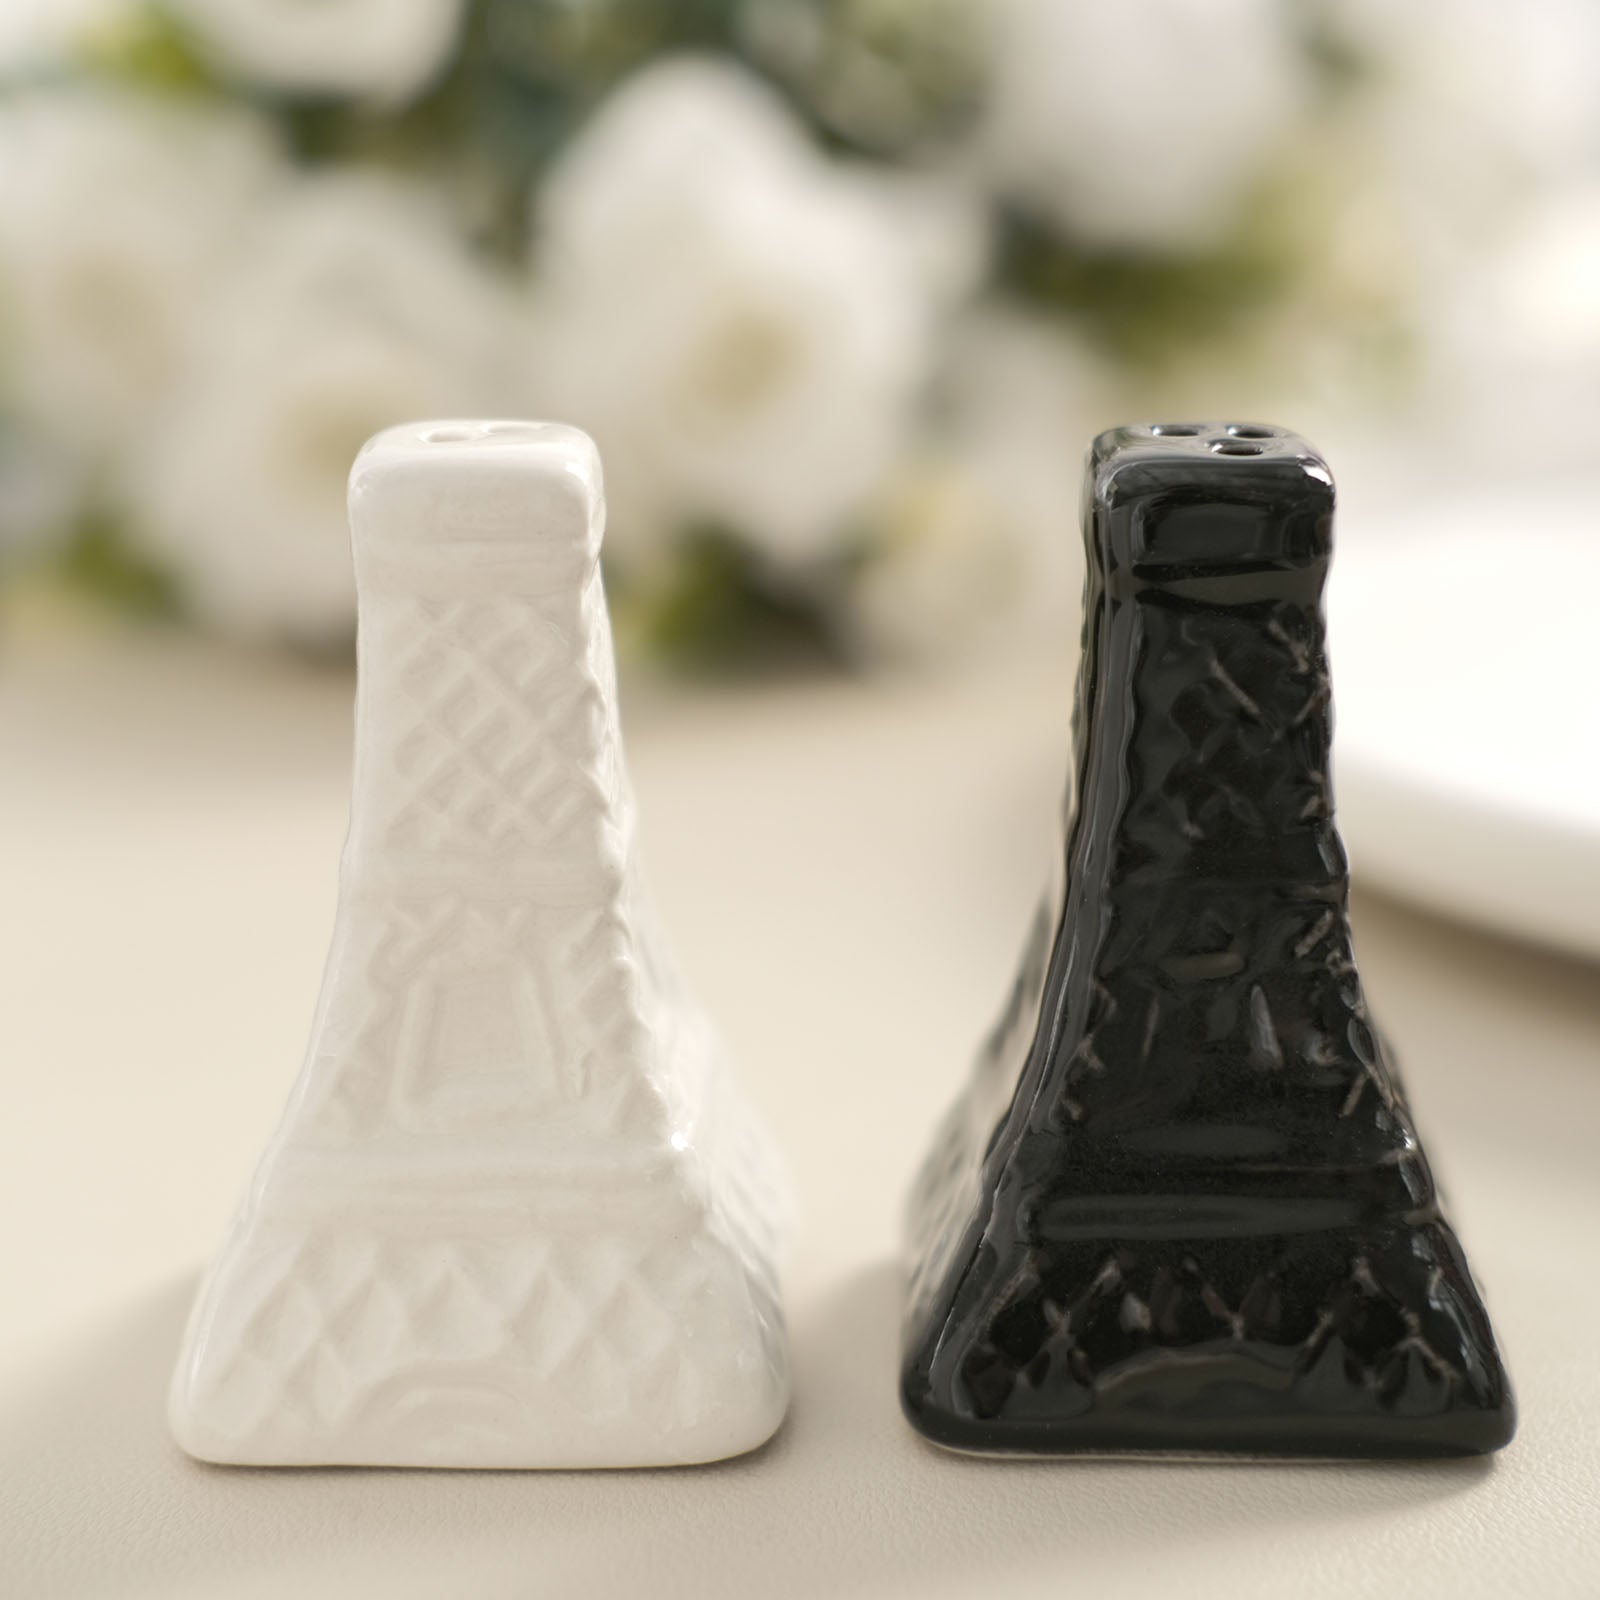 Tag: Salt and Pepper Shakers